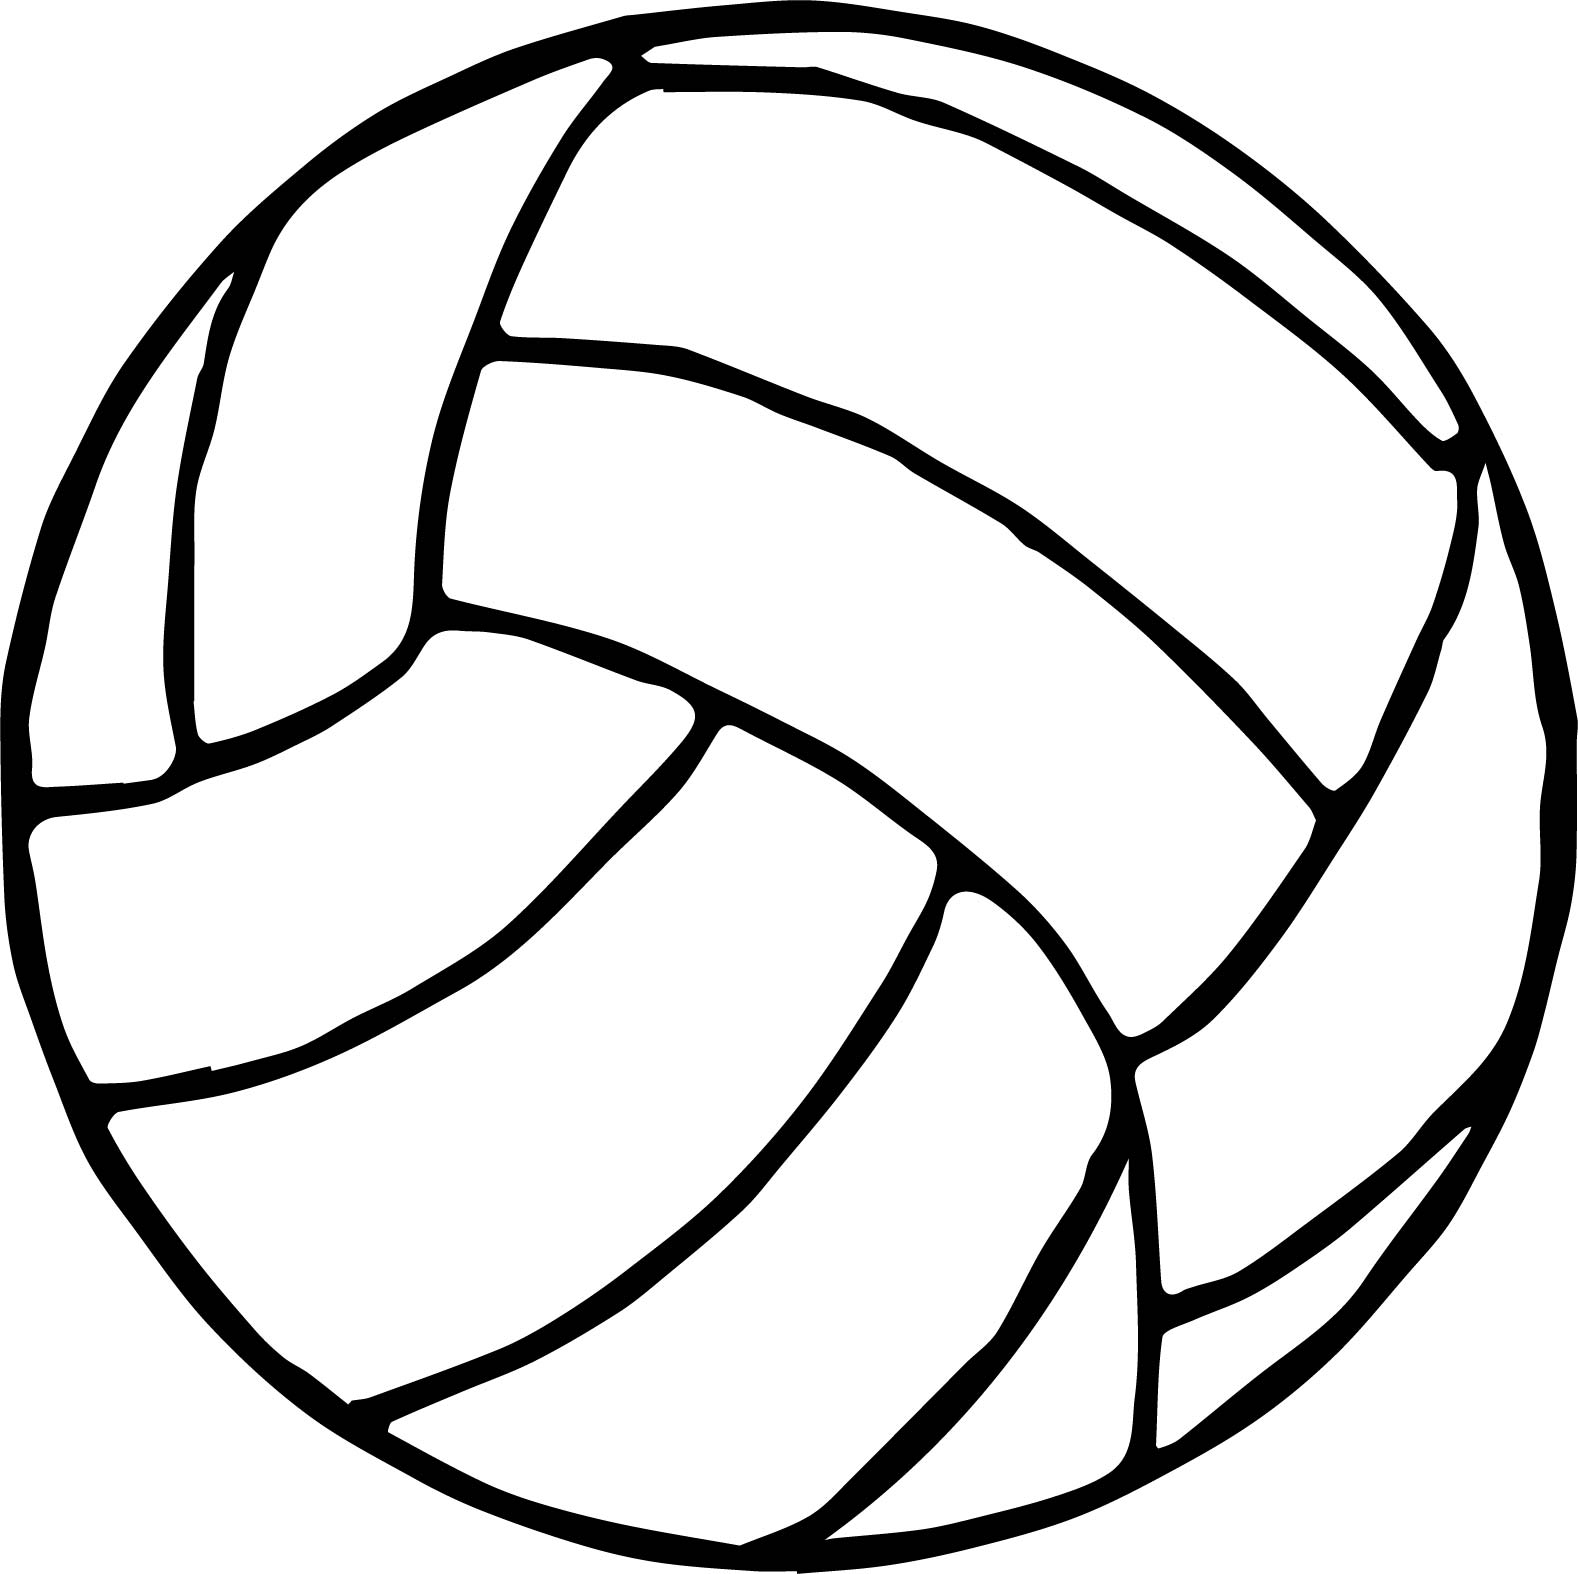 Volleyball Player Coloring Pages Coloring Pages